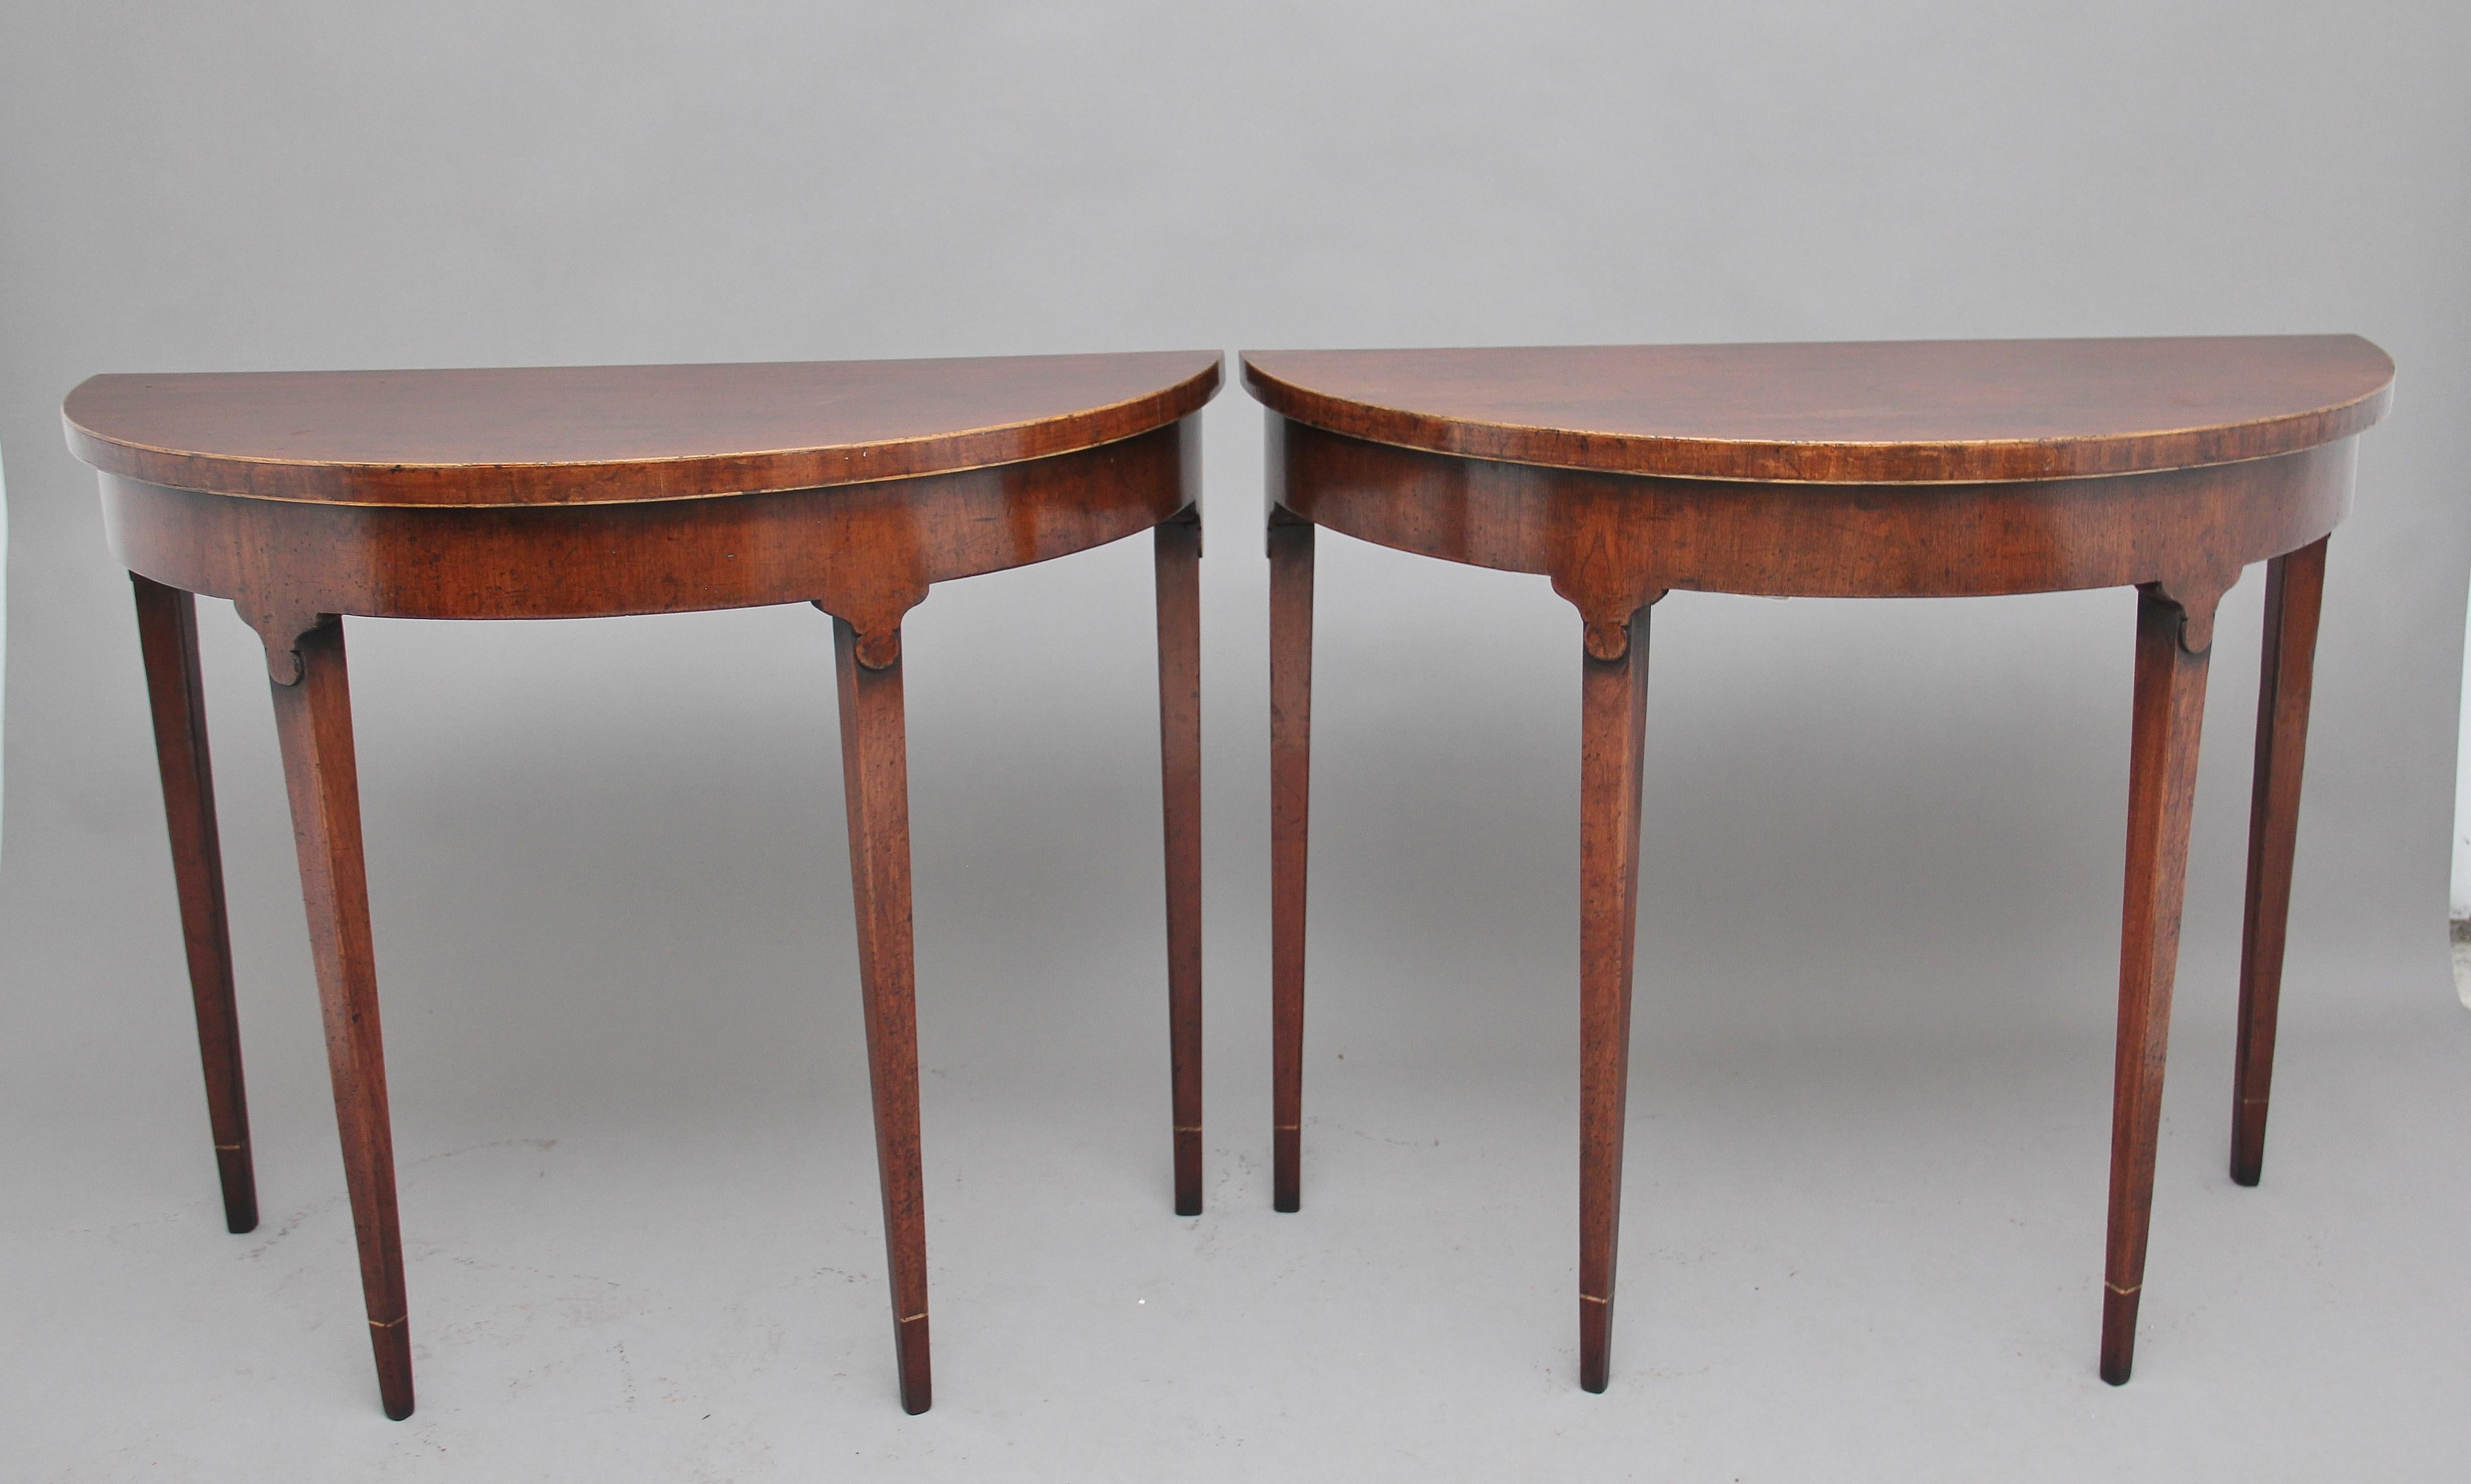 Pair of early 20th century Georgian style mahogany demilune console tables, the solid mahogany tops with boxwood white line, nice shaped detail at the bottom of the apron, supported on four square tapering legs, circa 1920.